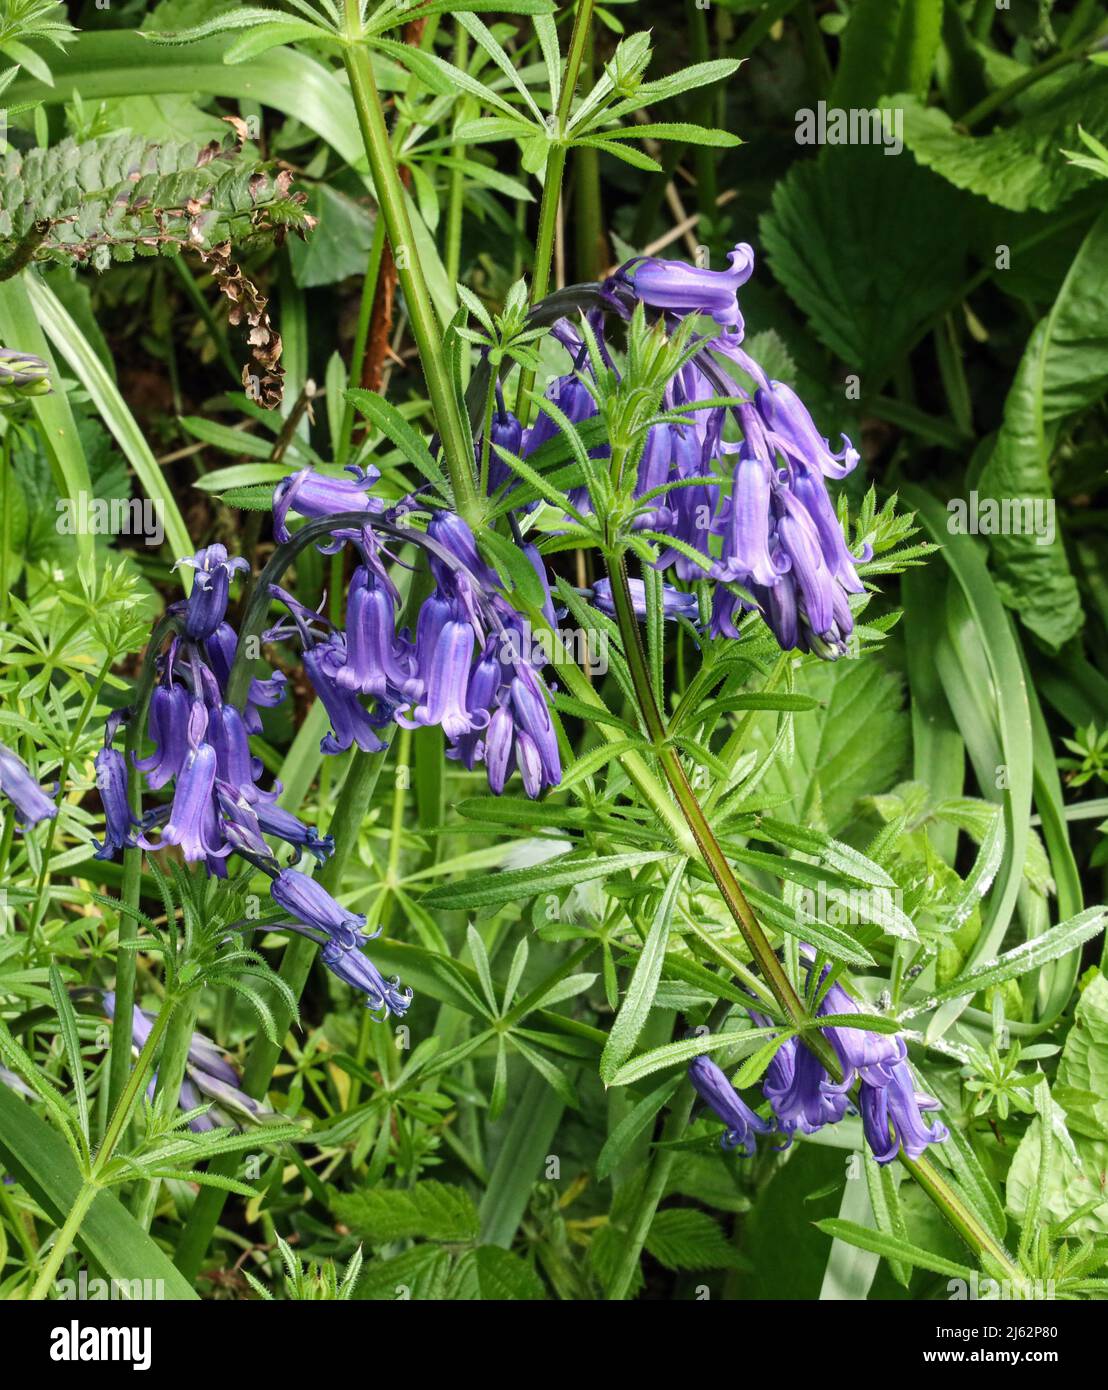 English Bluebells are native to England grow on just one side of the stem.  Vertical, portait format Stock Photo